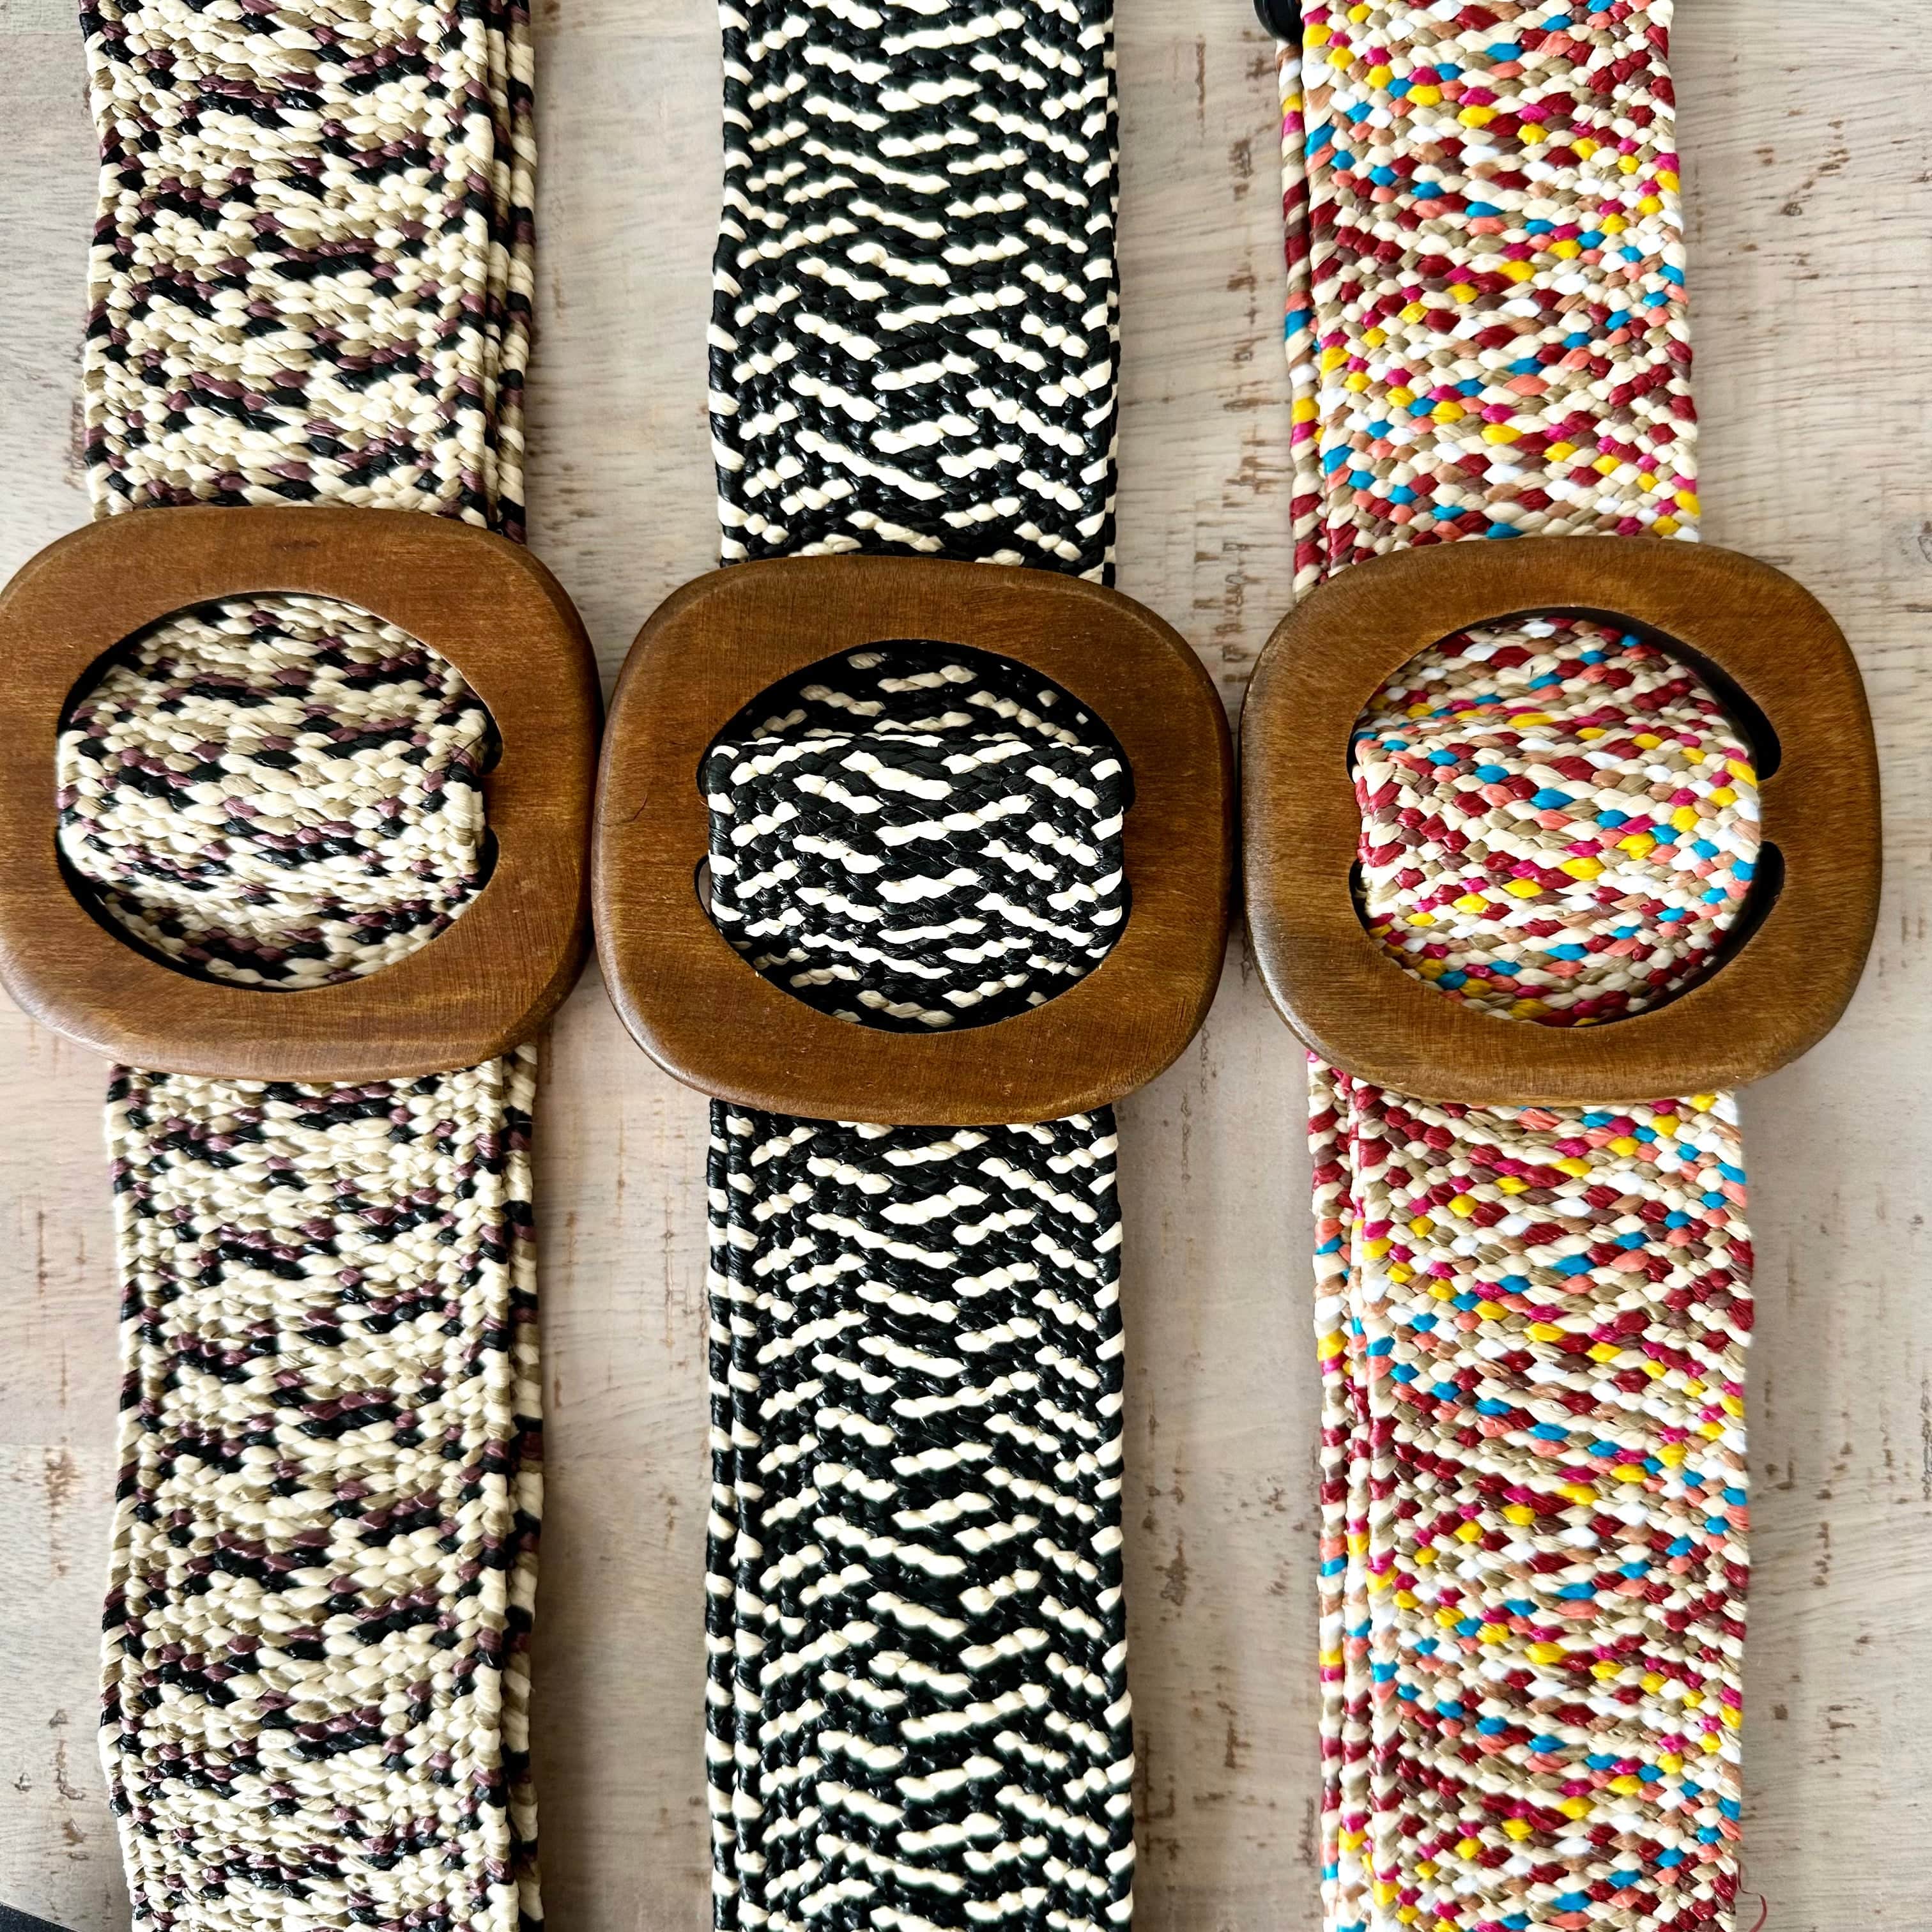 lusciousscarves Stretchy Raffia/Straw Woven Summer Belt with a Wooden Buckle.